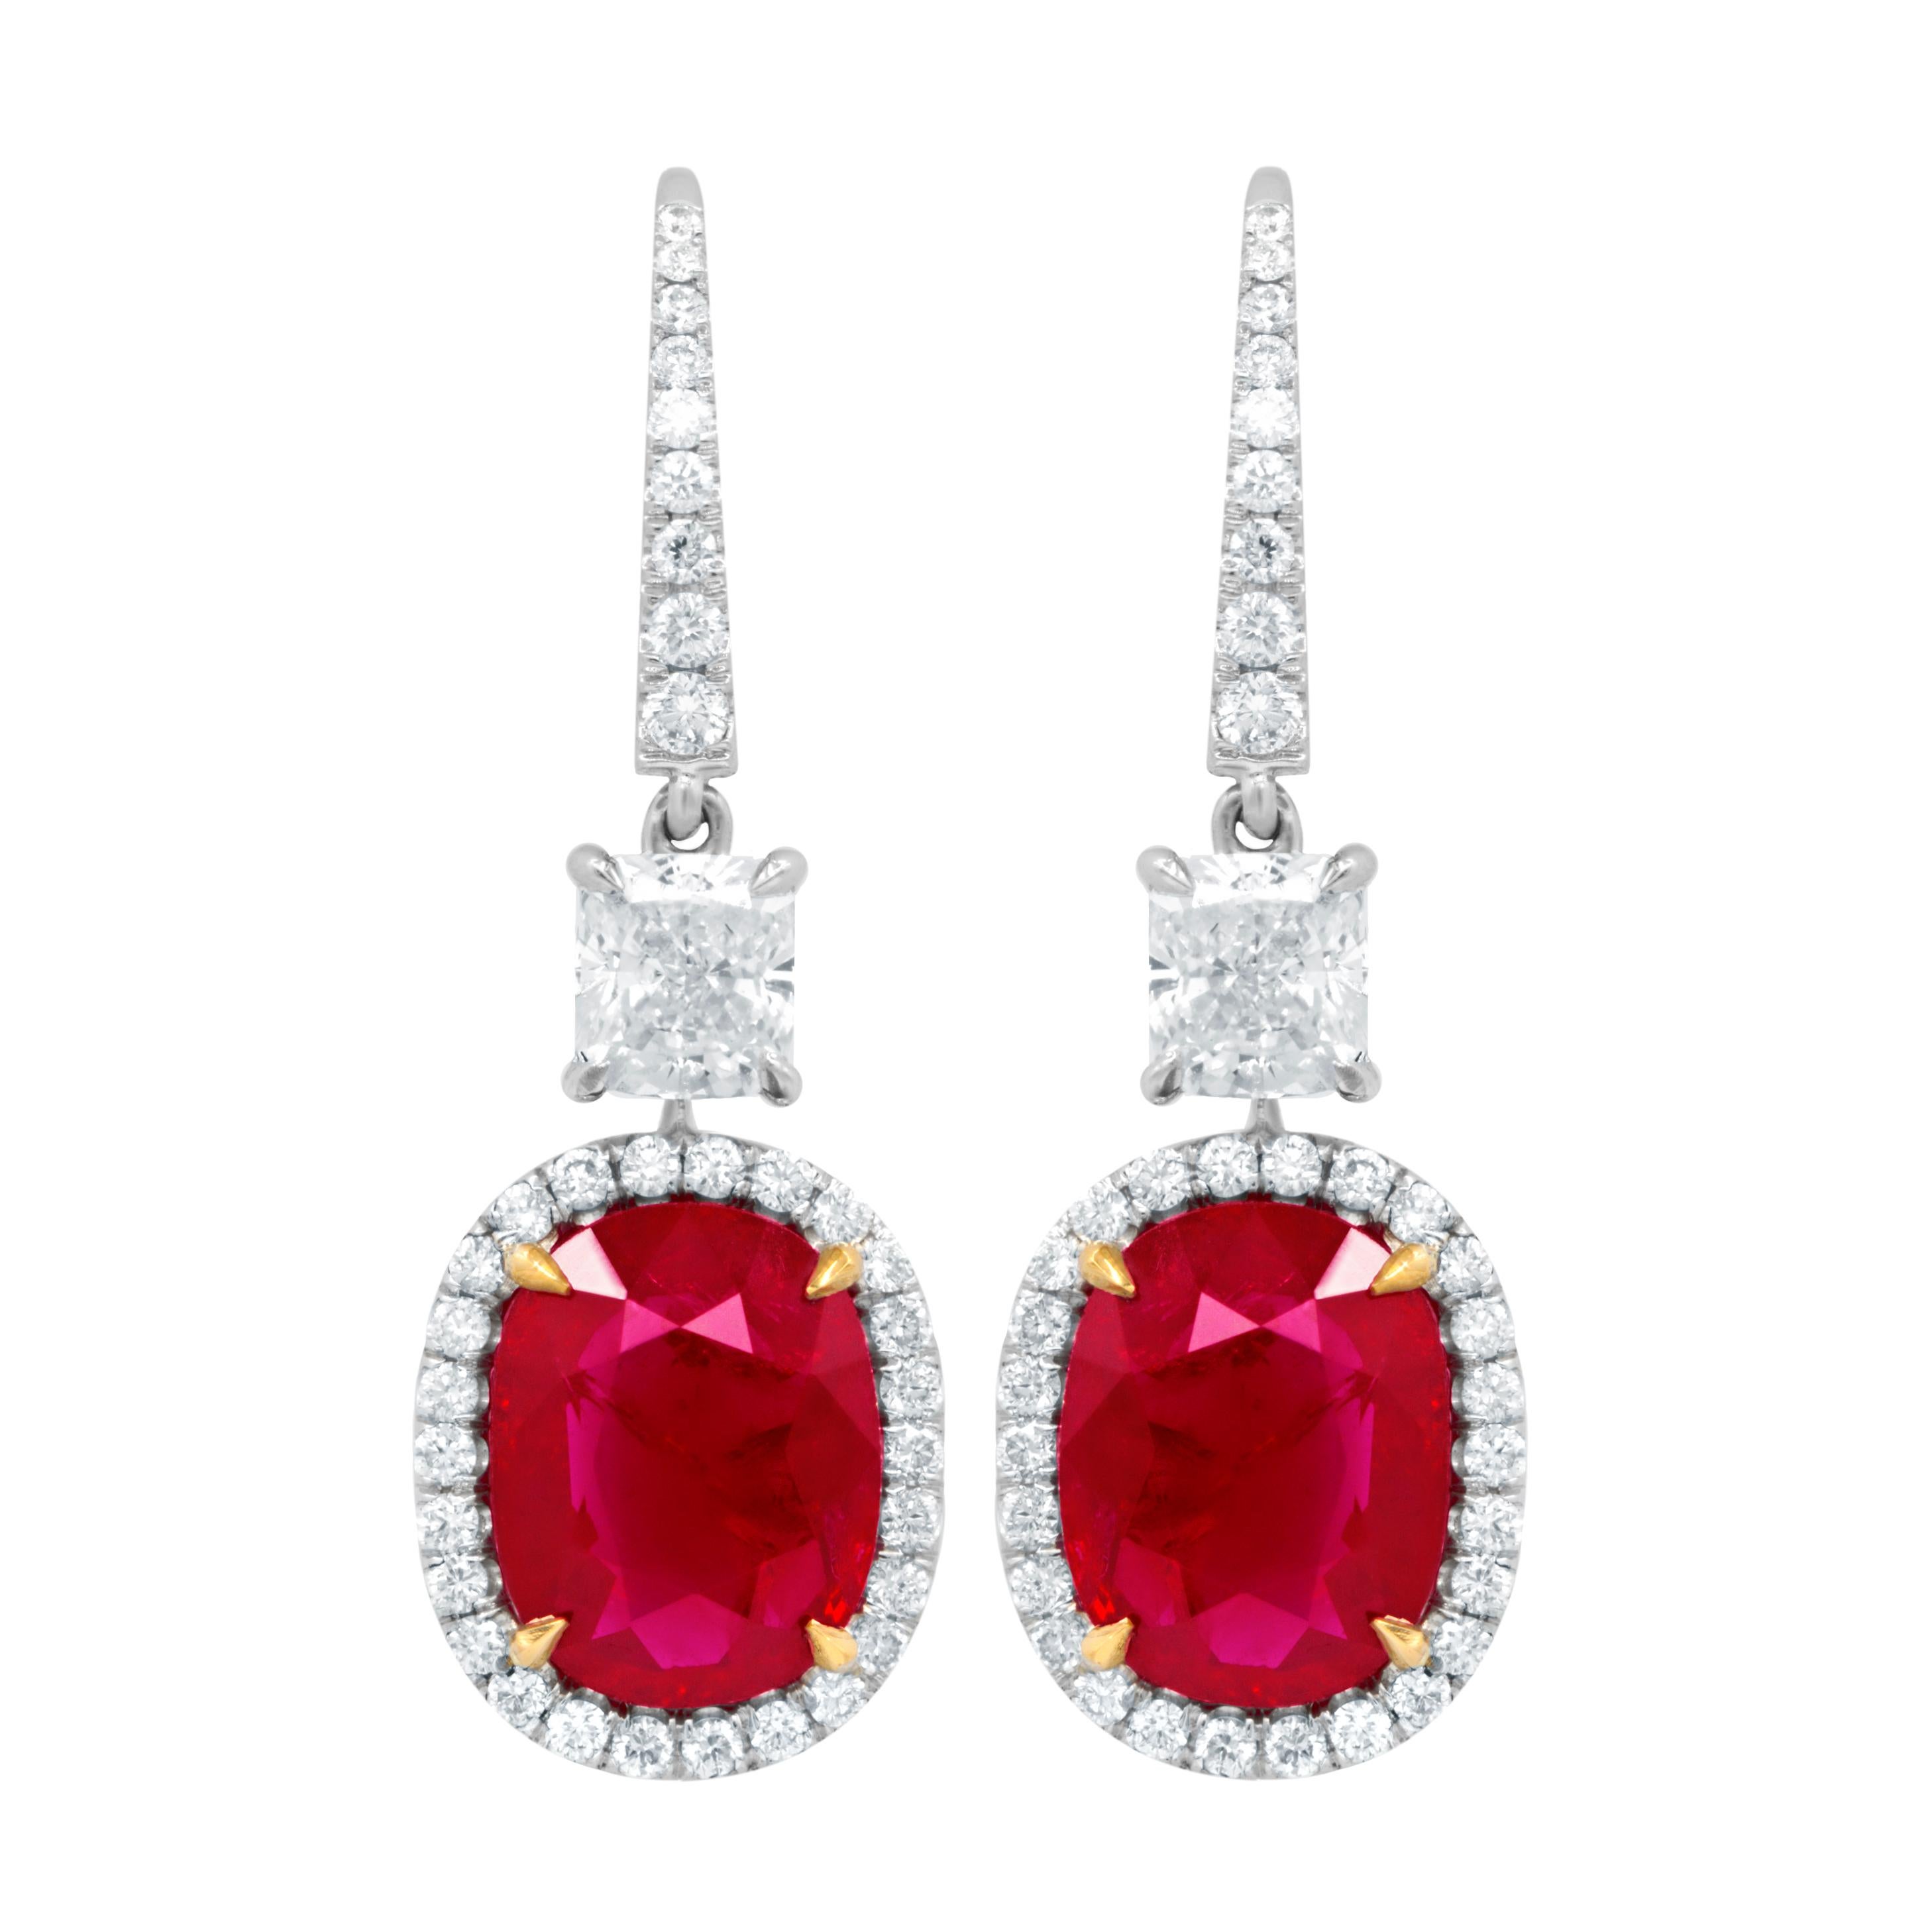 18kt White Gold Oval Shape Ruby Gia Certified Earrings Features: 6.68ct Ruby, Set In A Halo  With 2 Gia Certified Cushions With Total Of 1.85ct Of White Diamonds Around It
